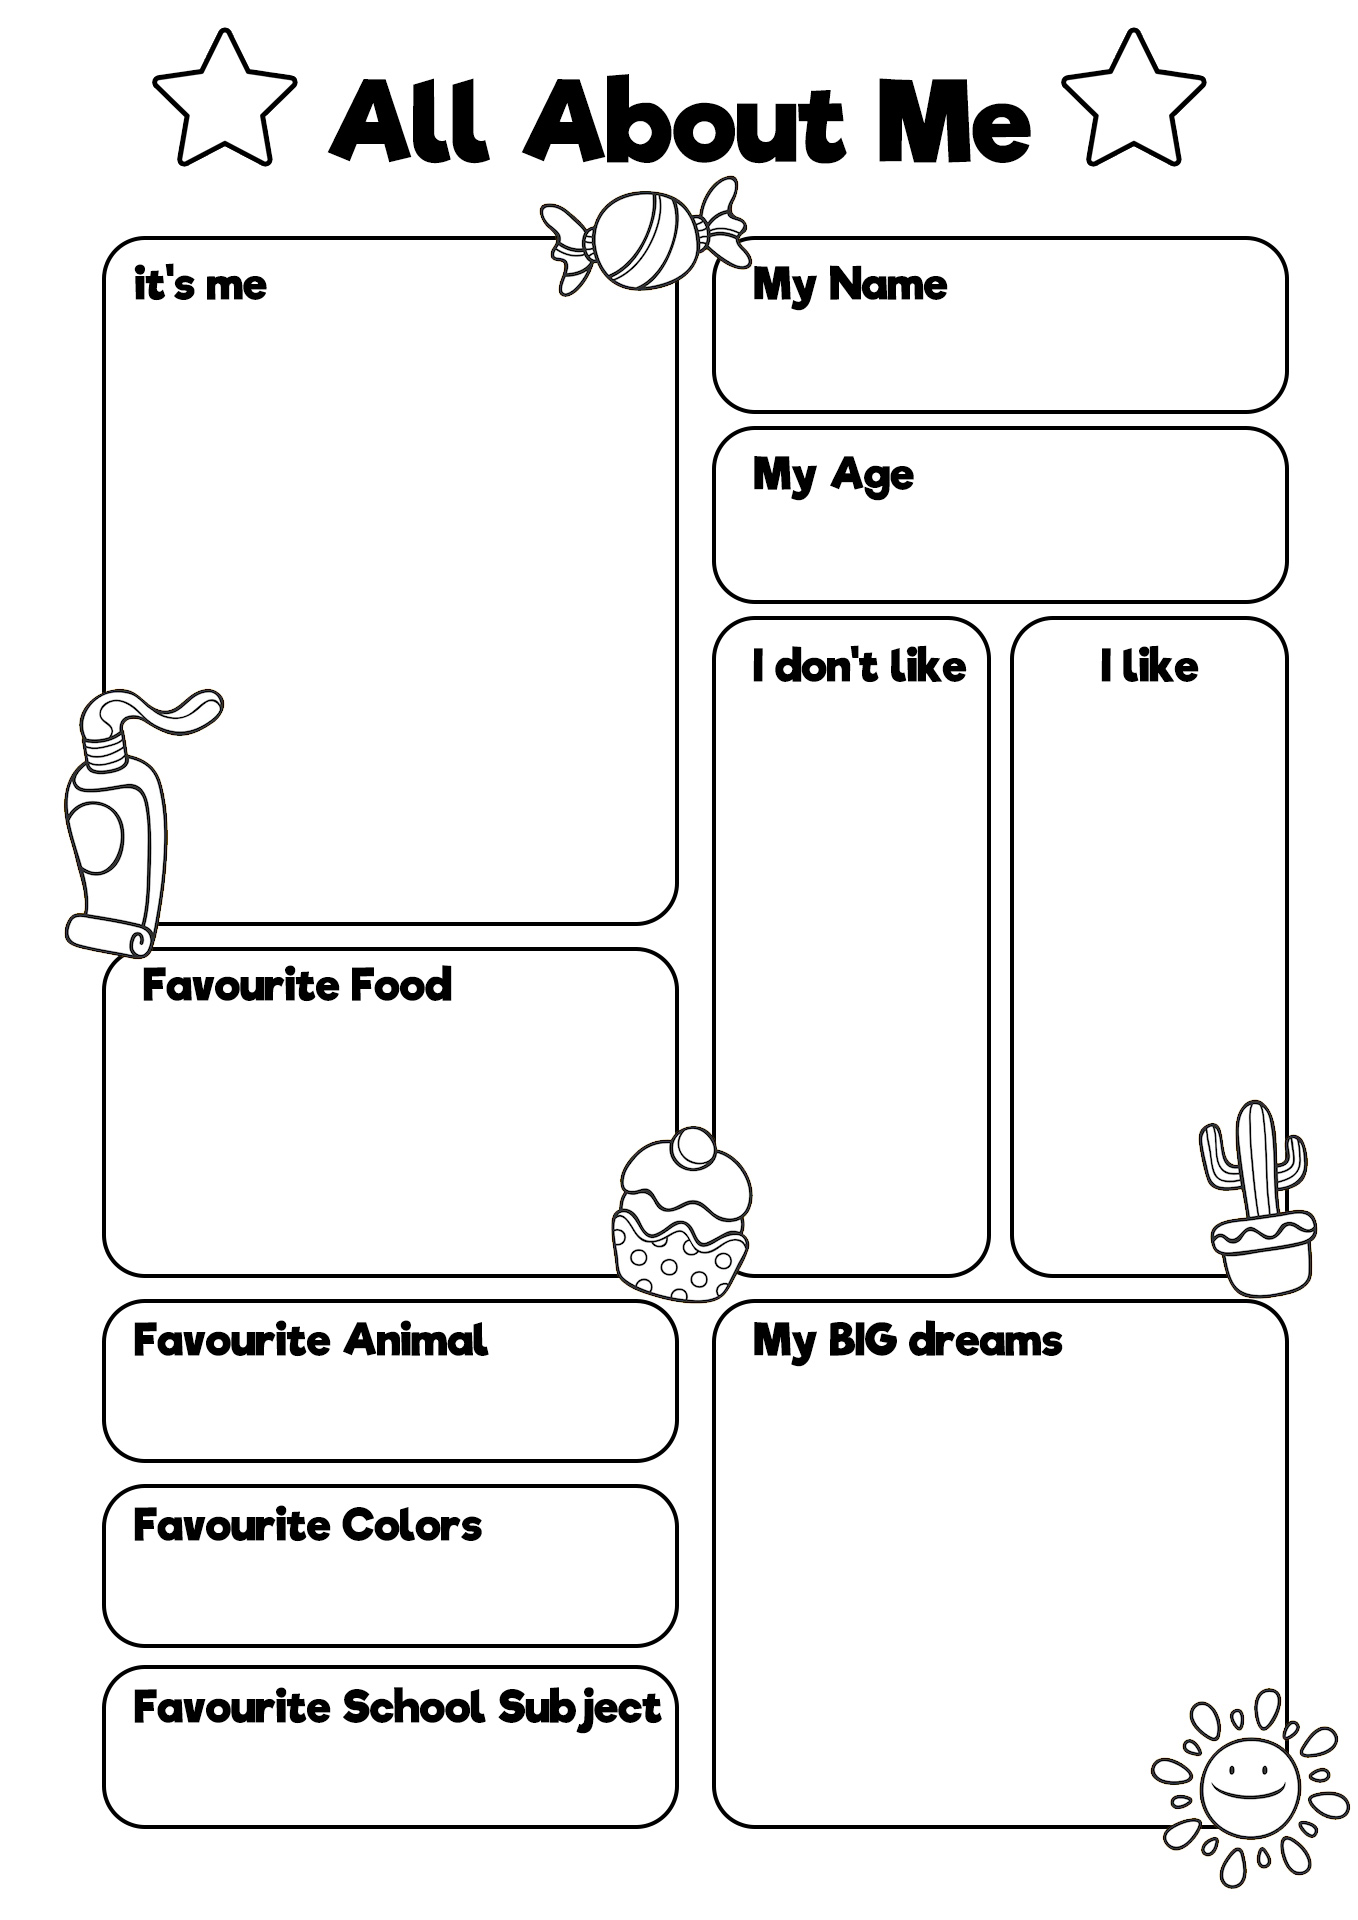 All About Me Preschool Worksheets Free Image